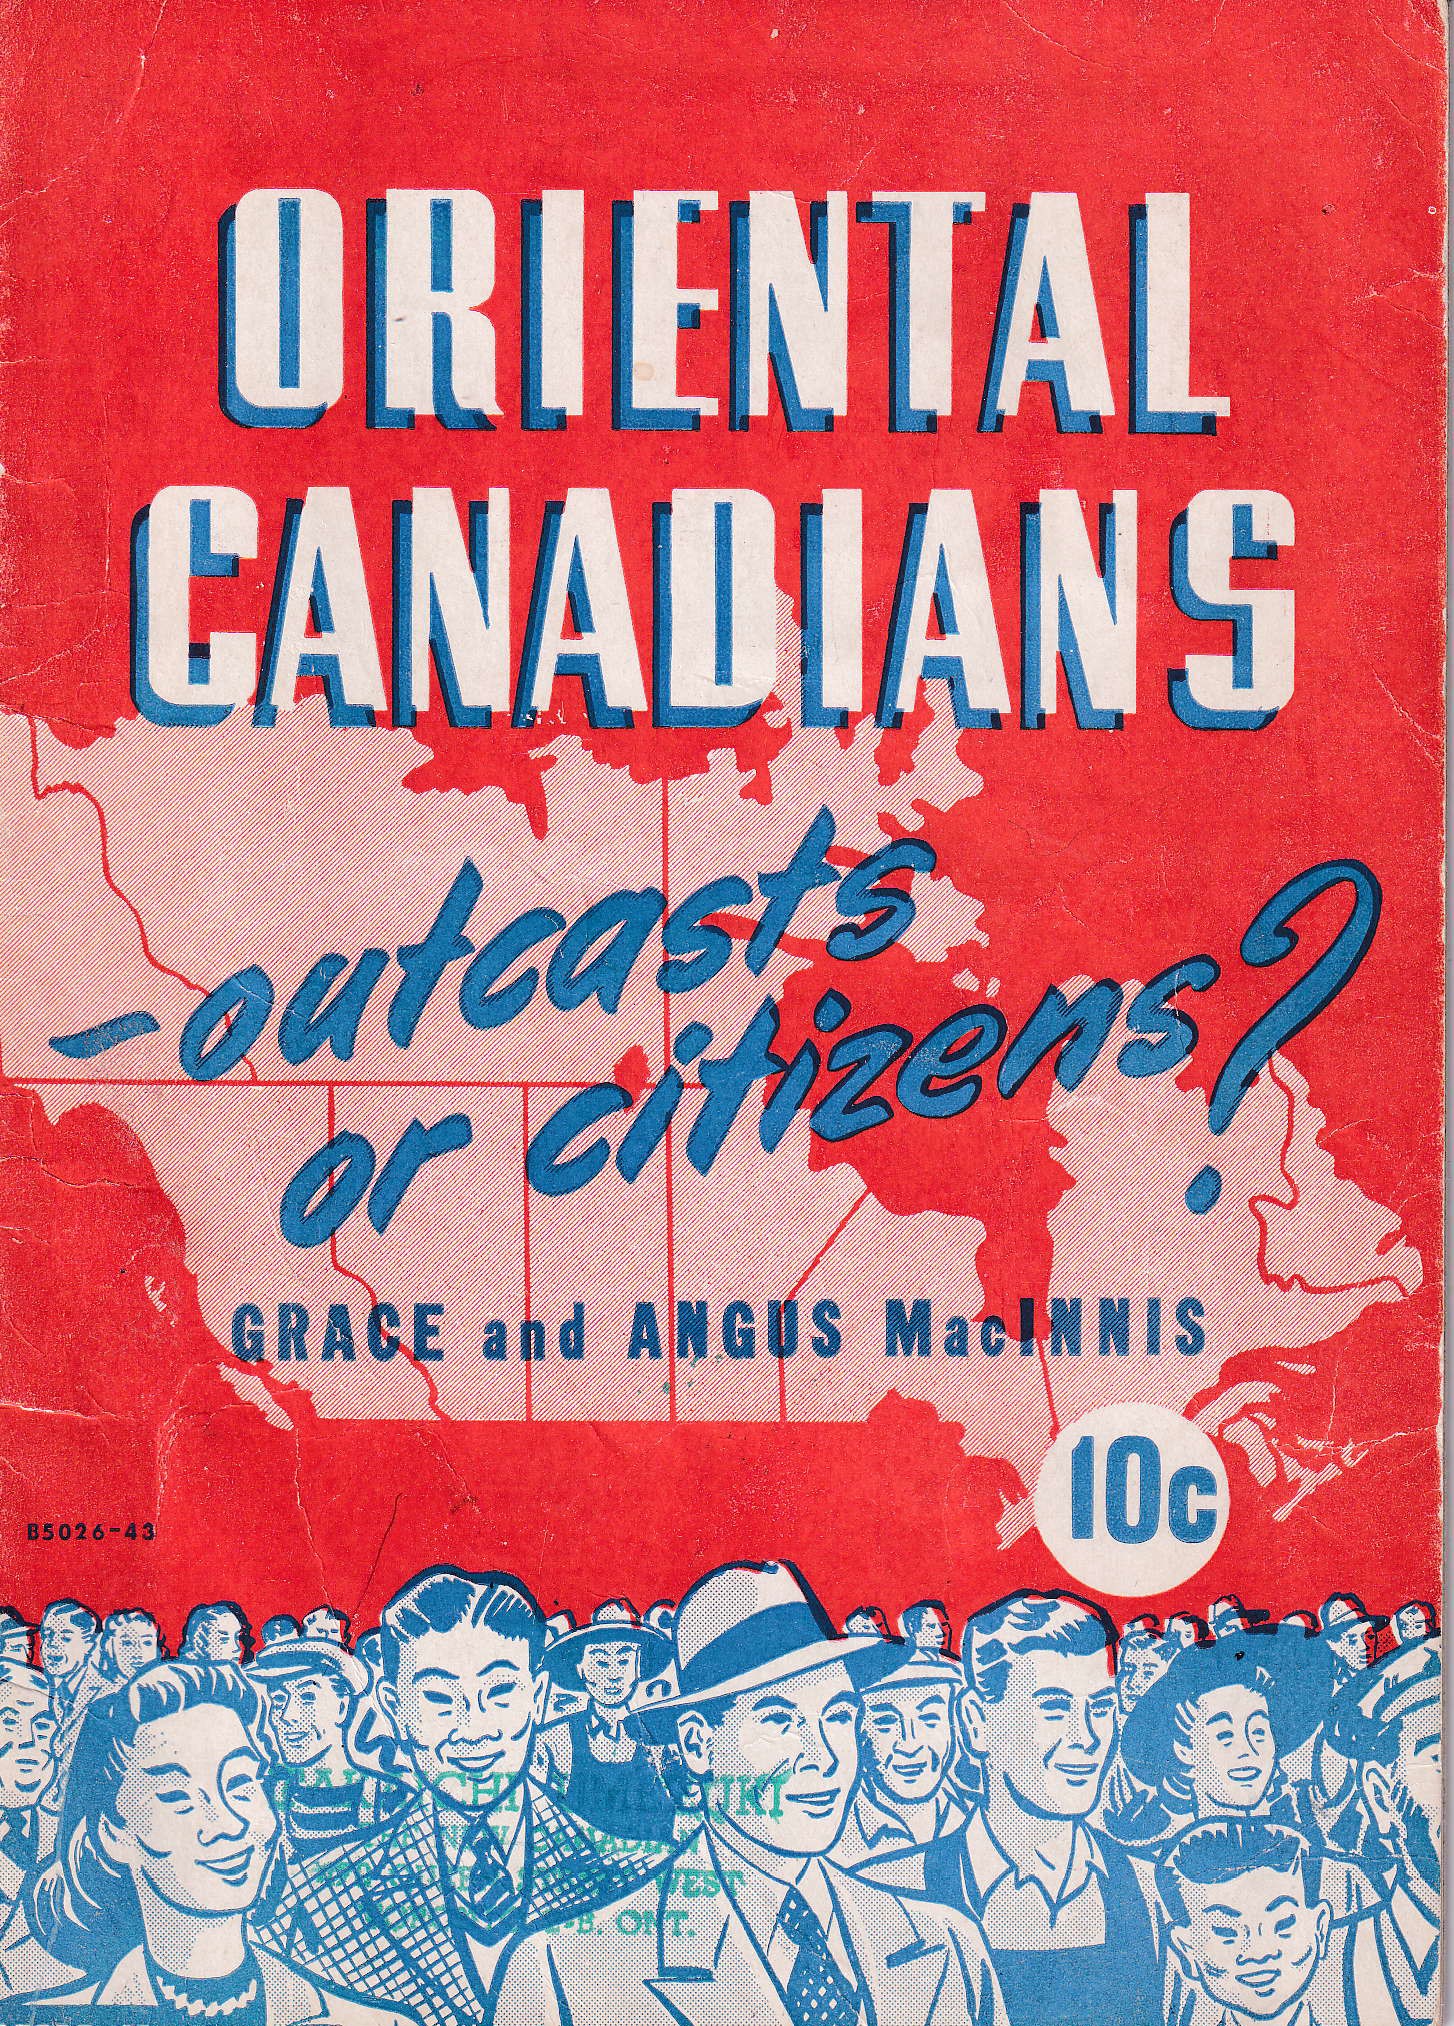 Booklet titled Oriental Canadians - outcasts or citizens?